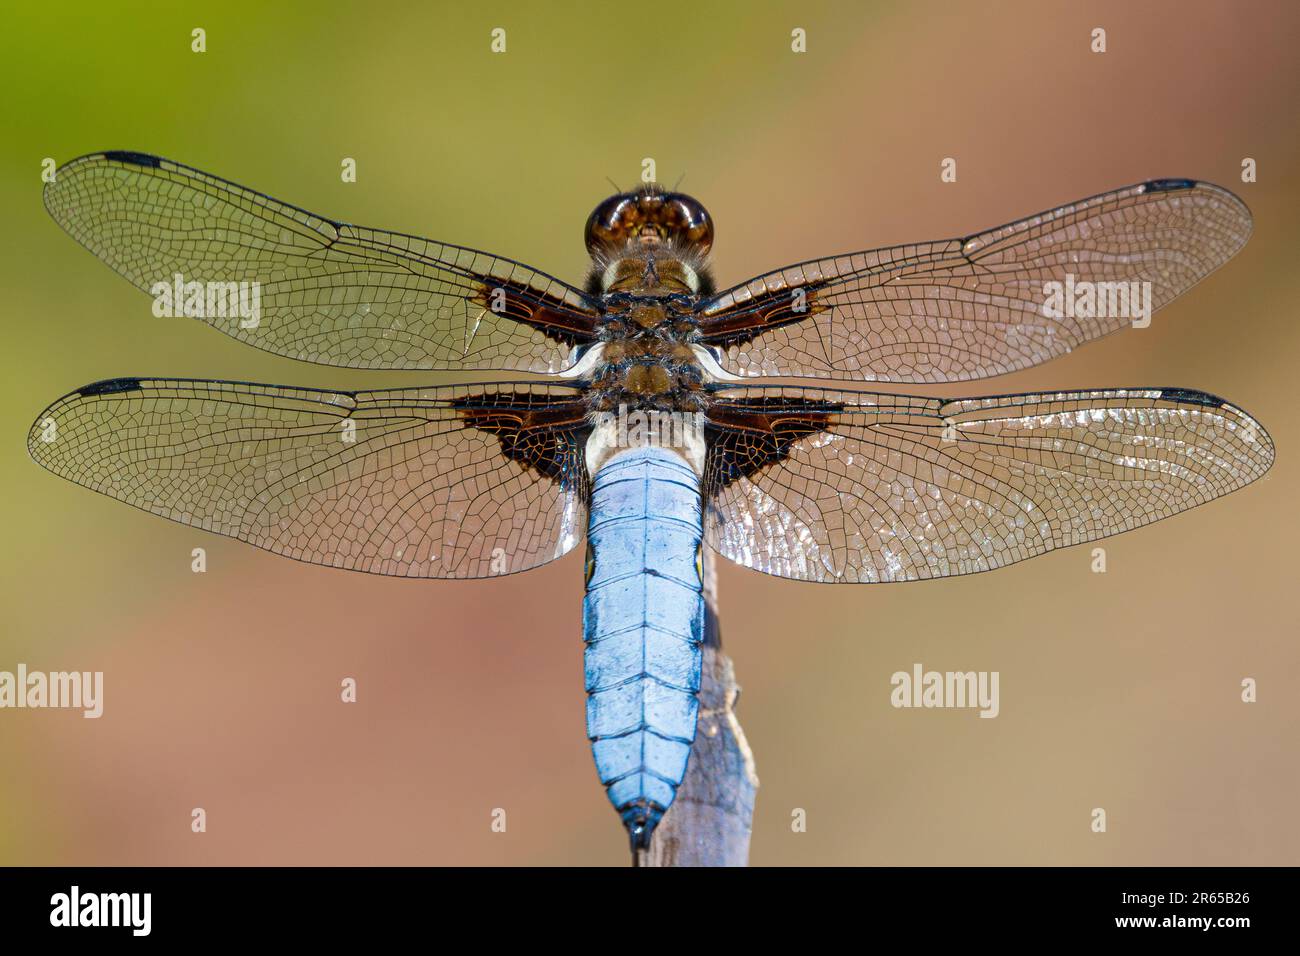 dragon fly resting on a perch Stock Photo